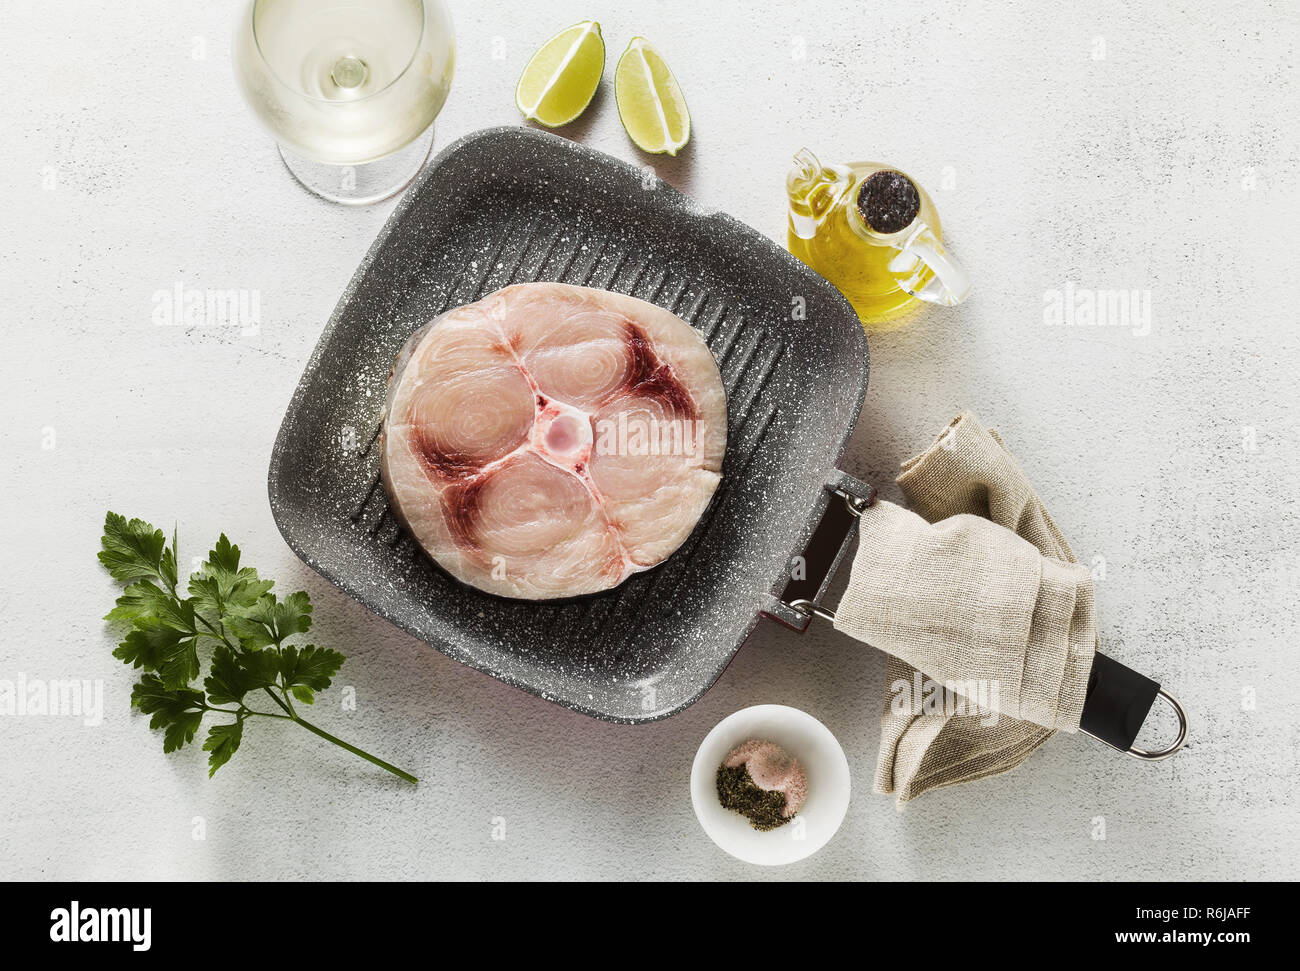 raw swordfish steak on the grill pan with olive oil and spices, white wine glass Stock Photo